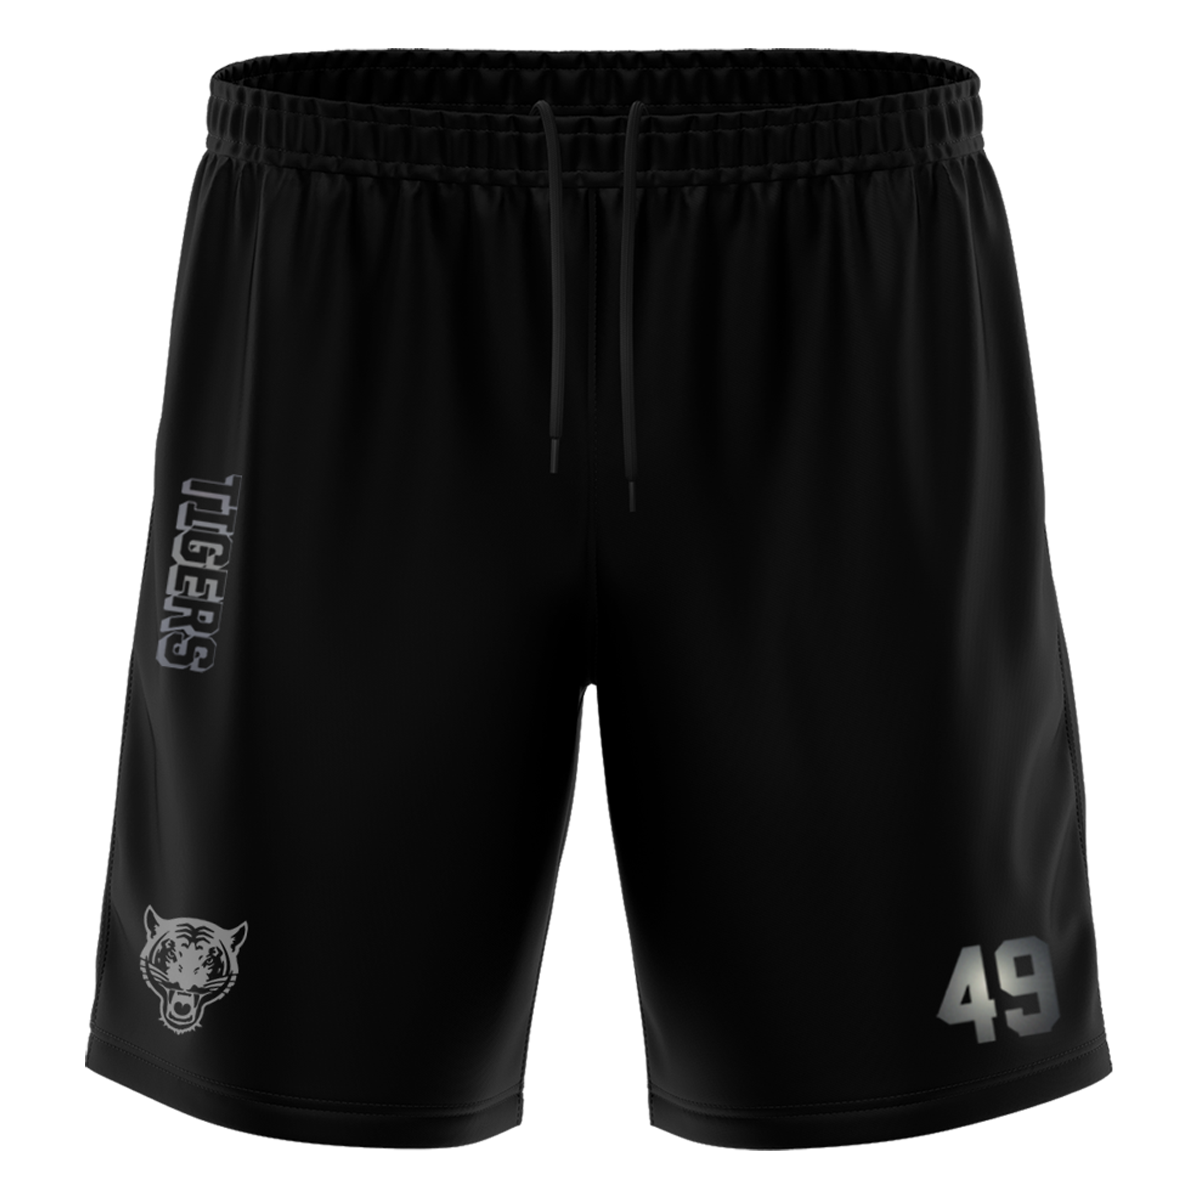 Tigers "Blackline" Training Short with Playernumber or Initials